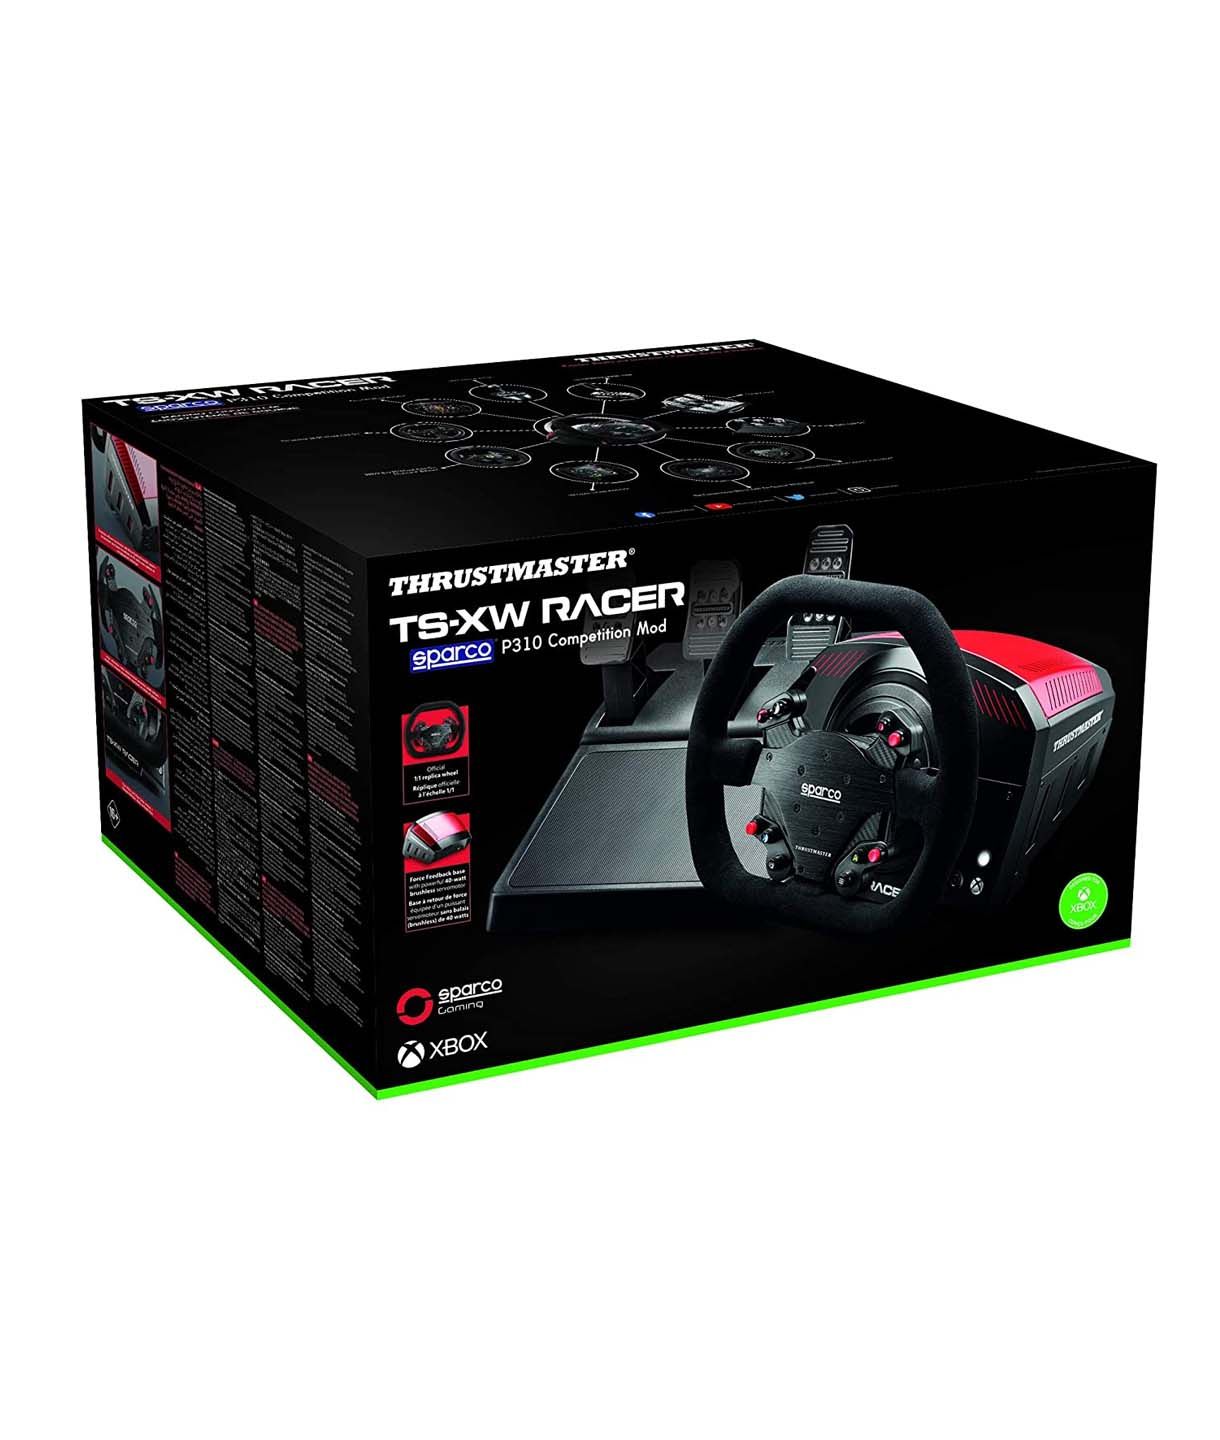 Vô Lăng Thrustmaster Ts Xw Racer Sparco P310 Competition Mod 5